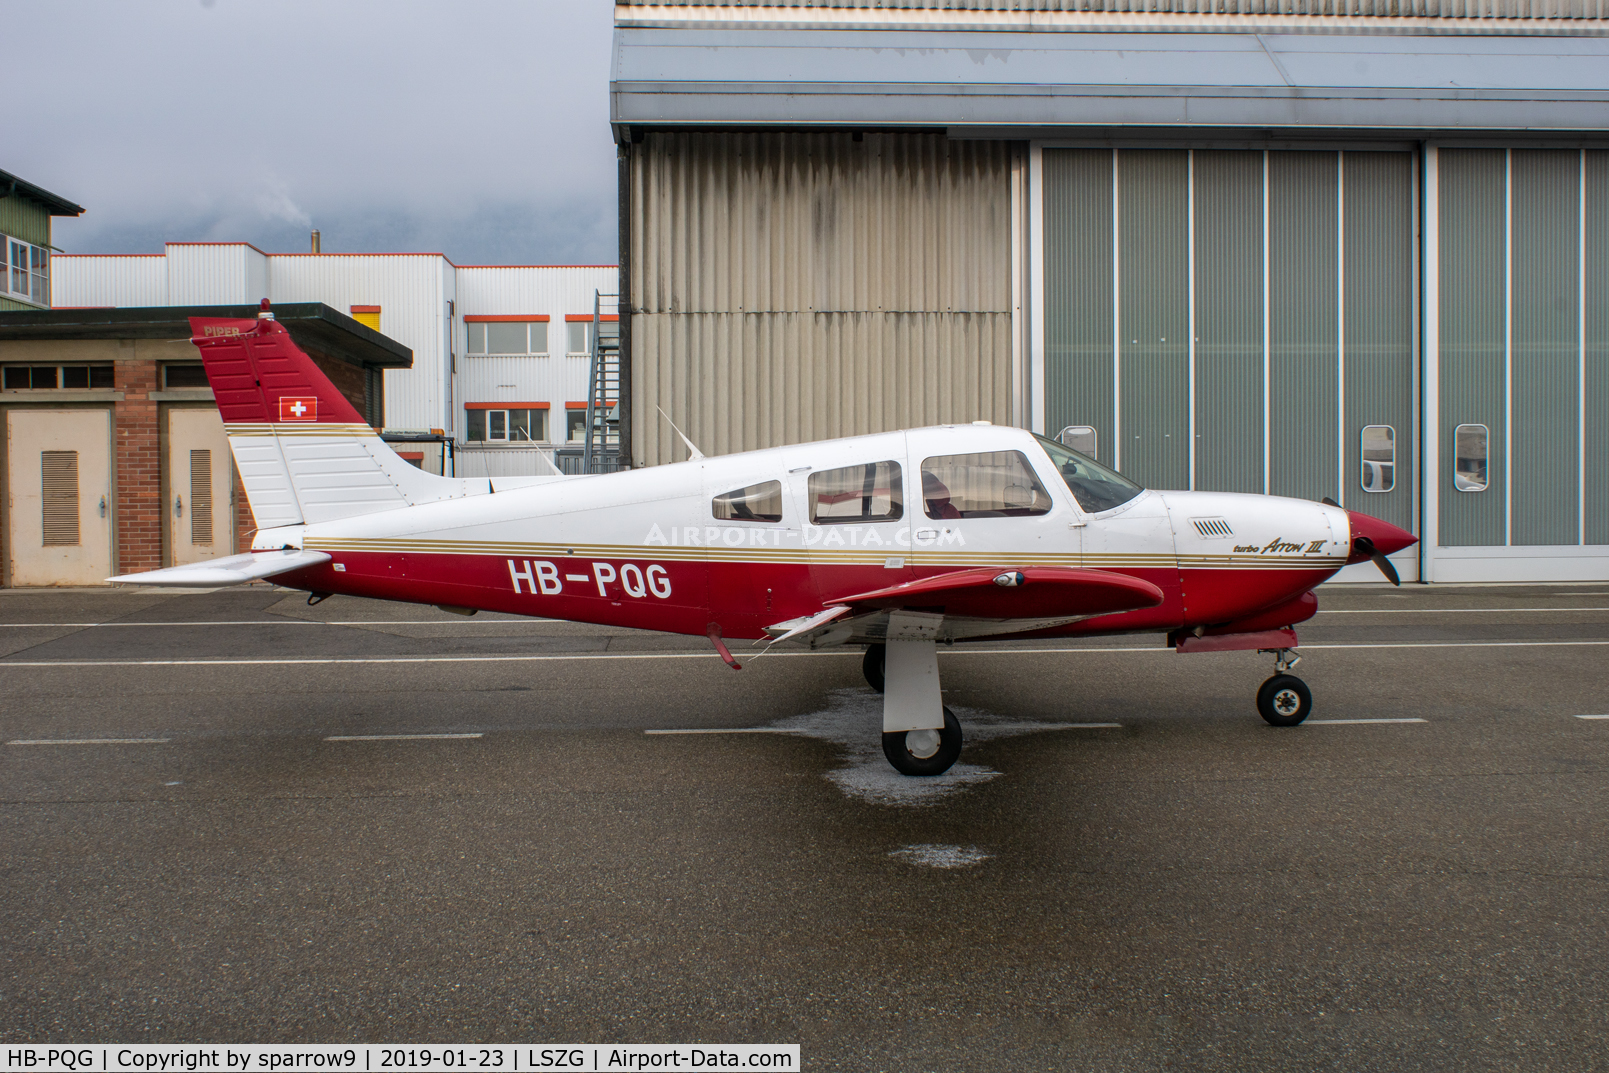 HB-PQG, 1977 Piper PA-28R-201T Cherokee Arrow III C/N 28R-7803047, At Grenchen. HB-registered since 2003-06-25.